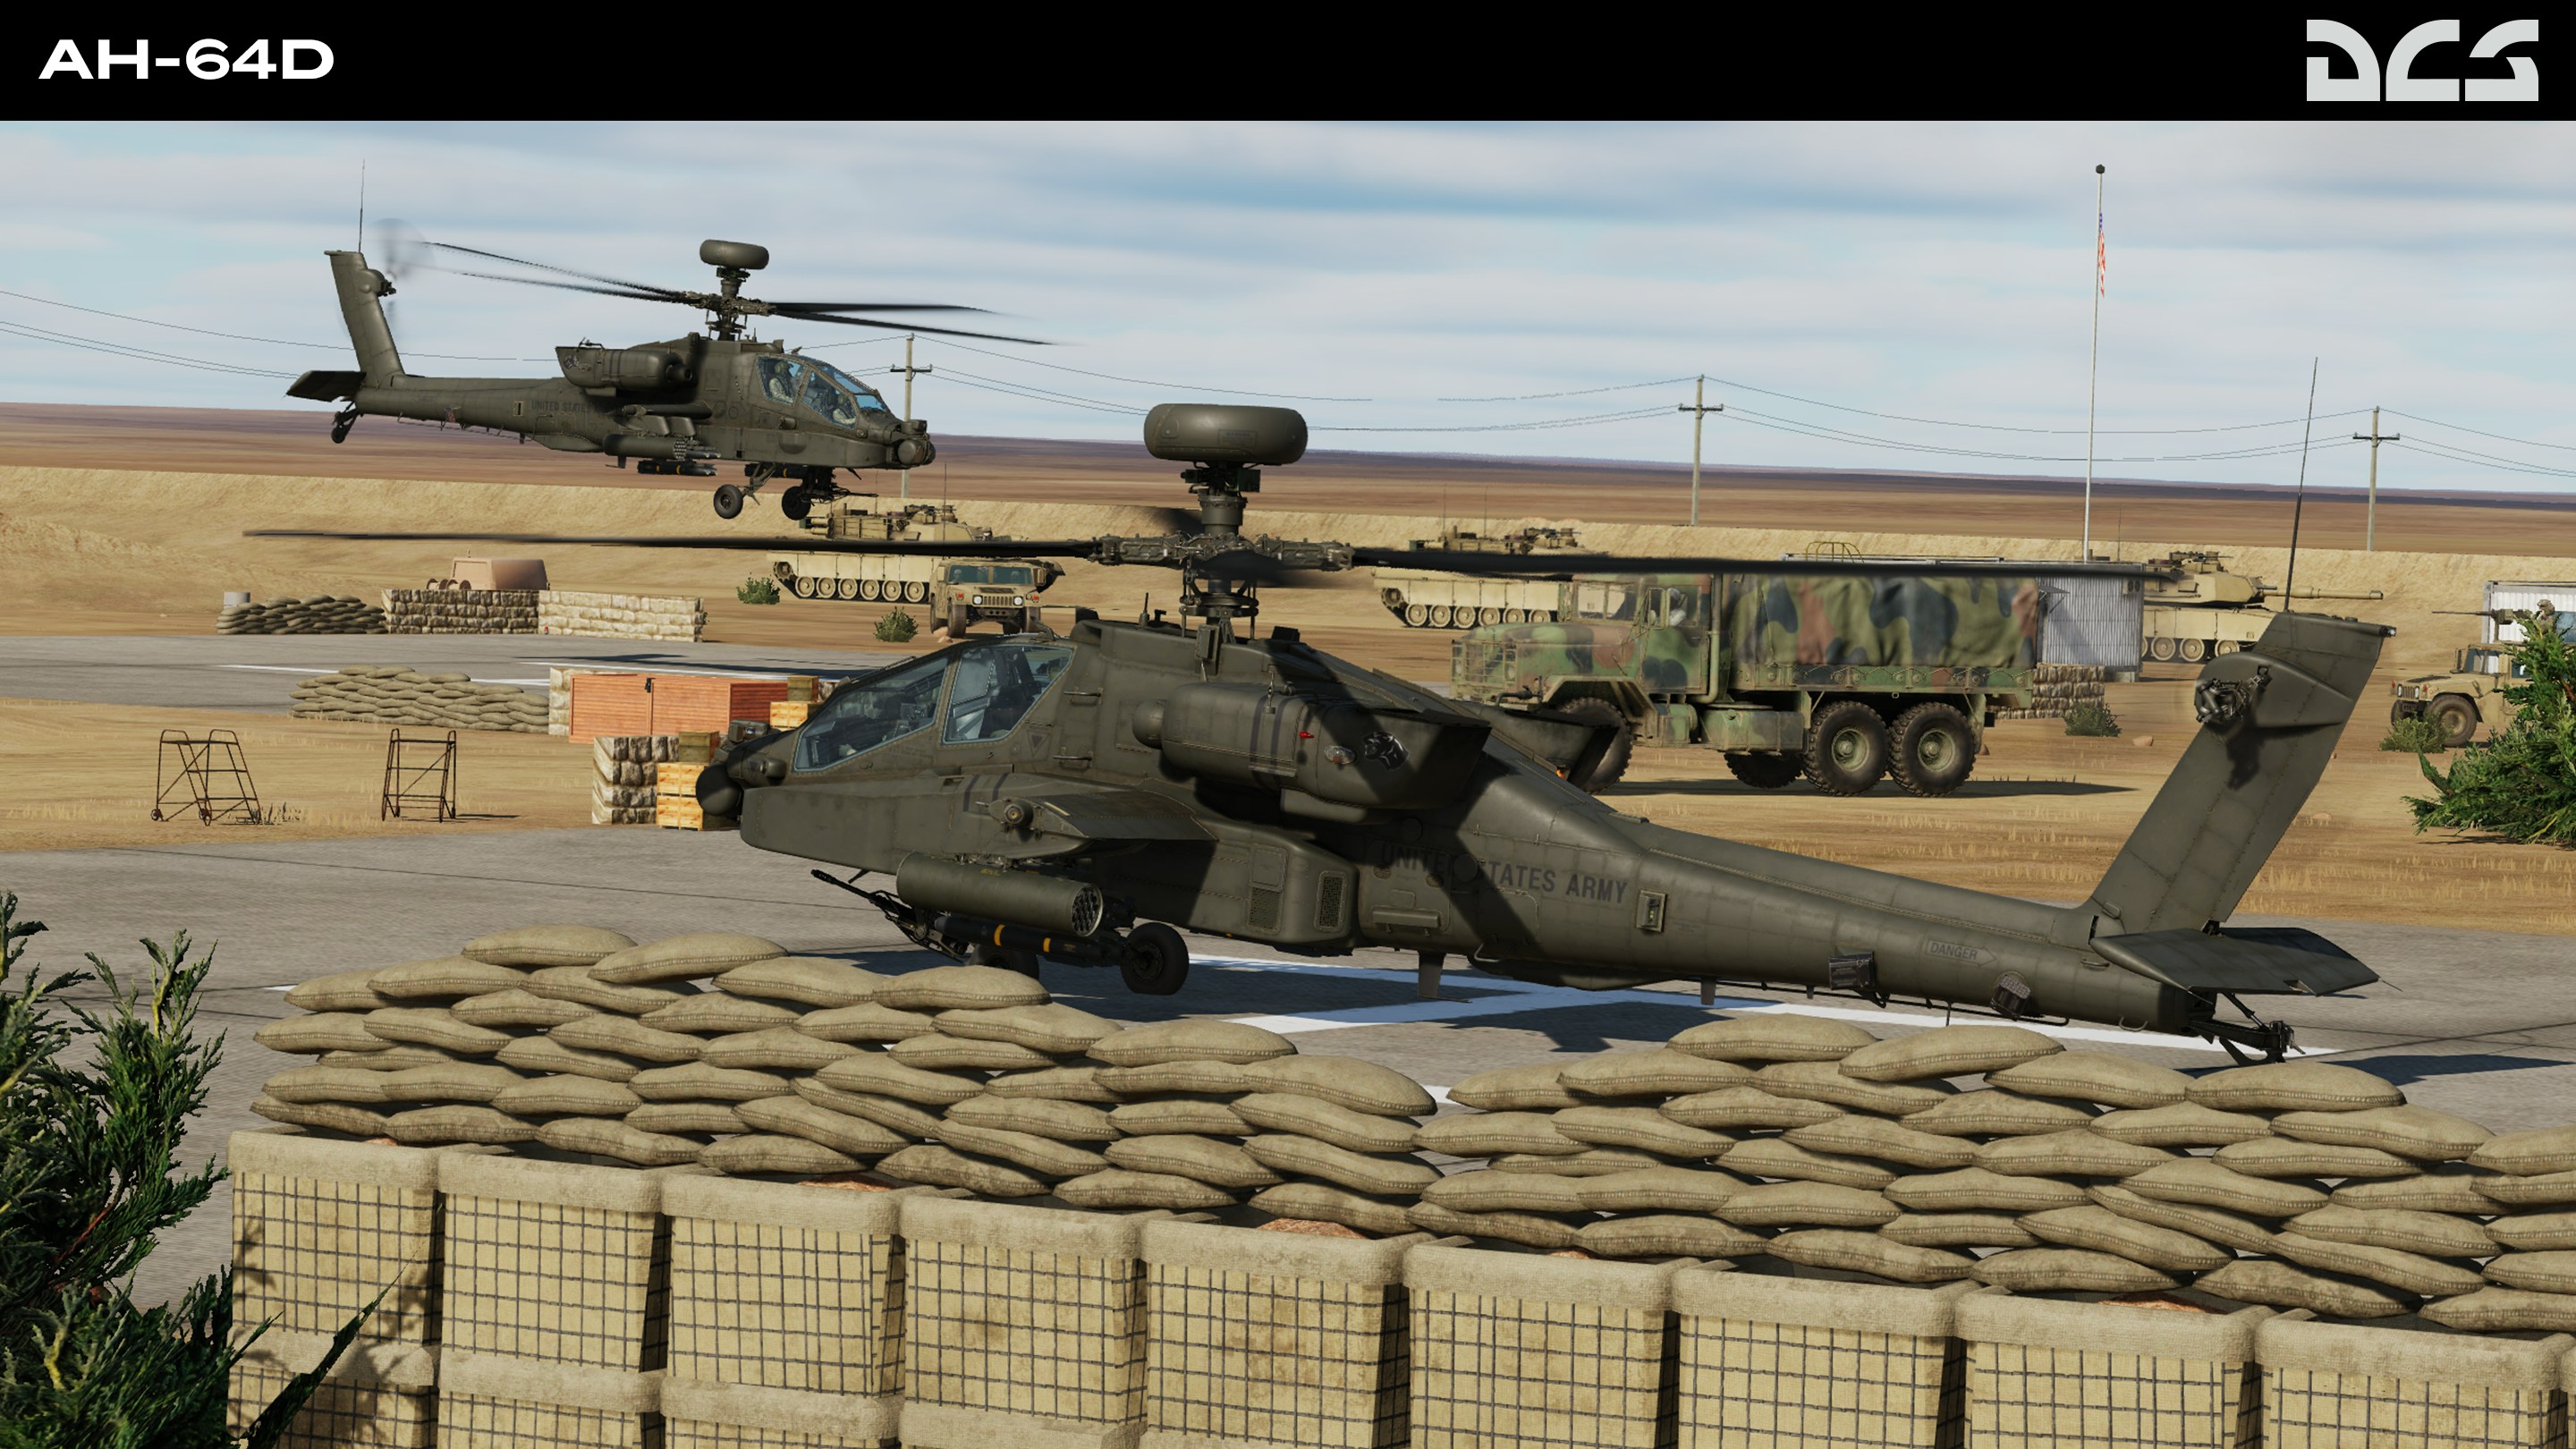 Eagle Dynamics AH-64D Early Access Released